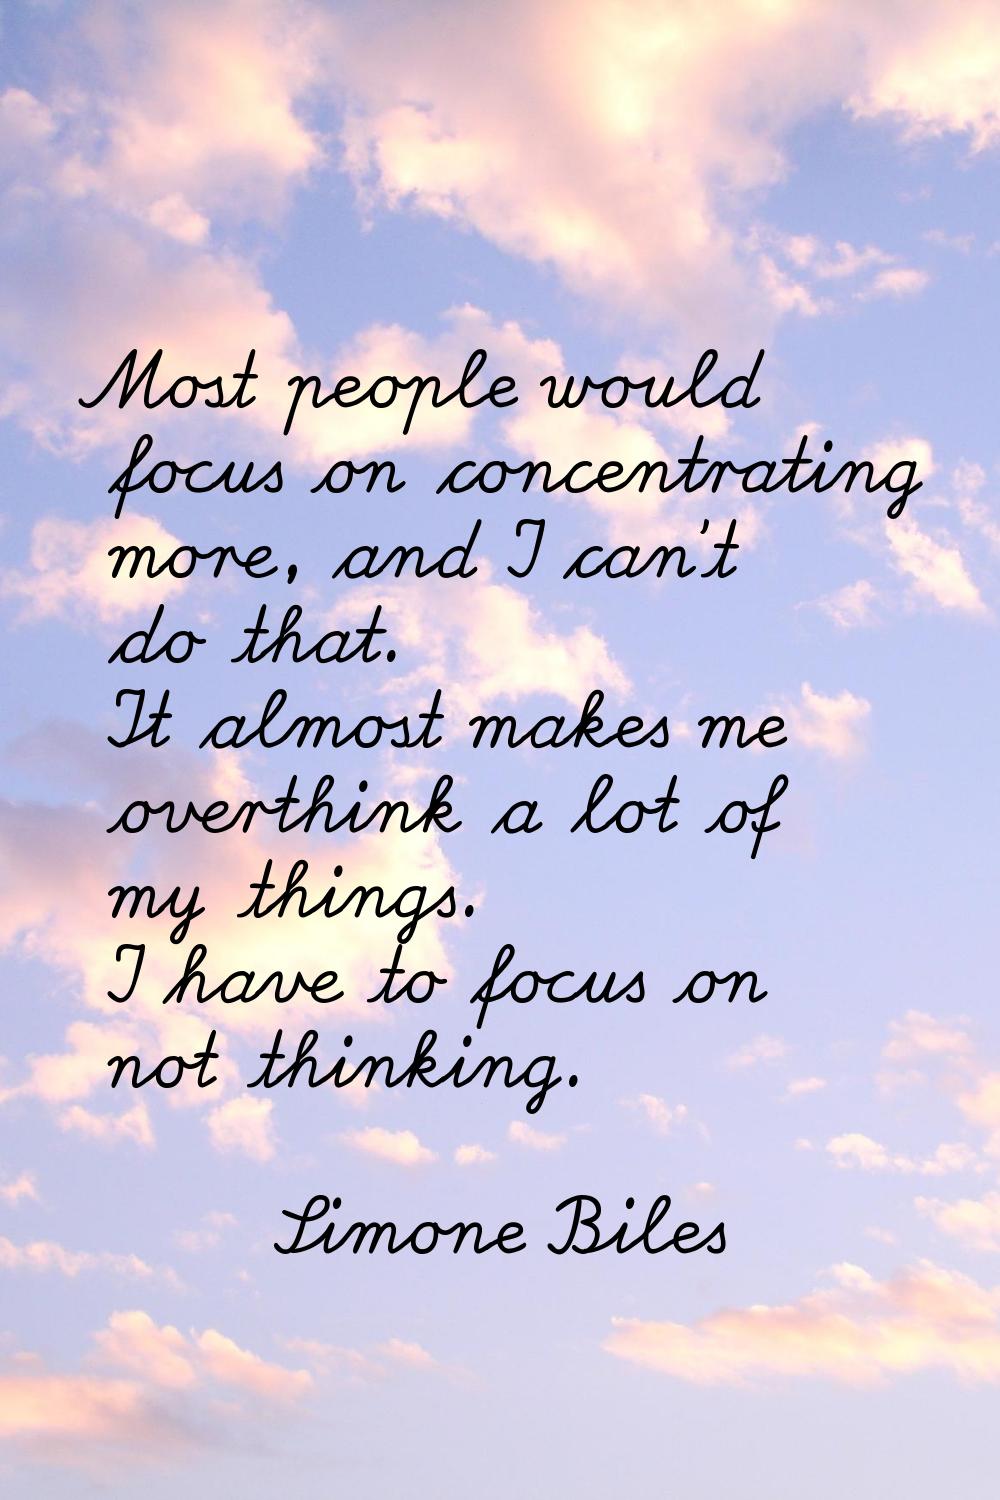 Most people would focus on concentrating more, and I can't do that. It almost makes me overthink a 